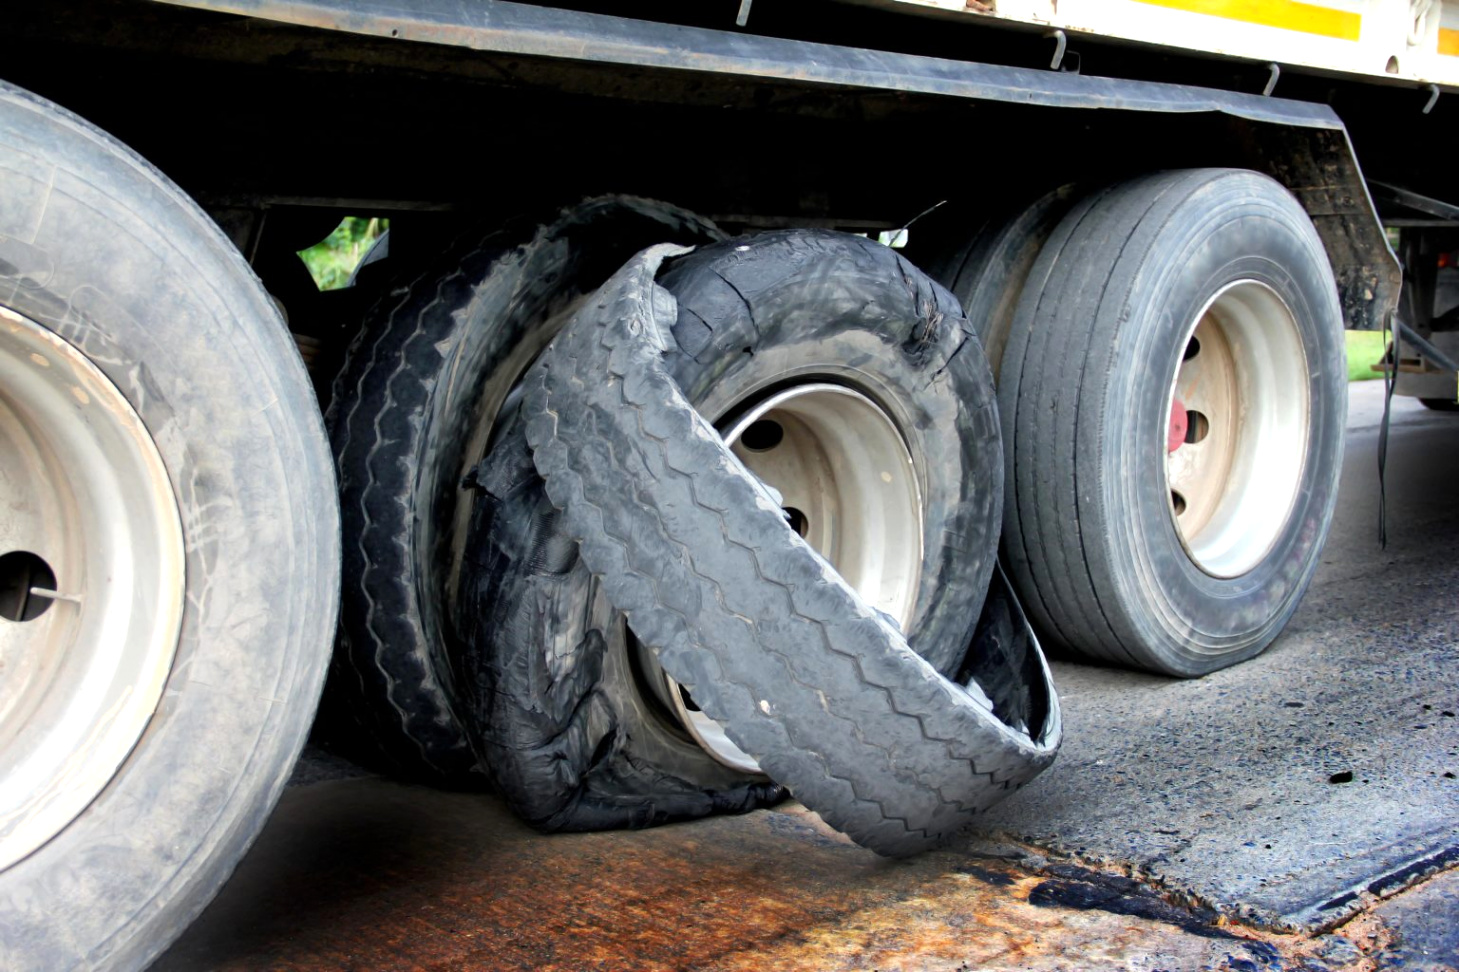 Slip and Fall Lawyer Houston Dans Houston Truck Tire Blowout Accident Lawyer